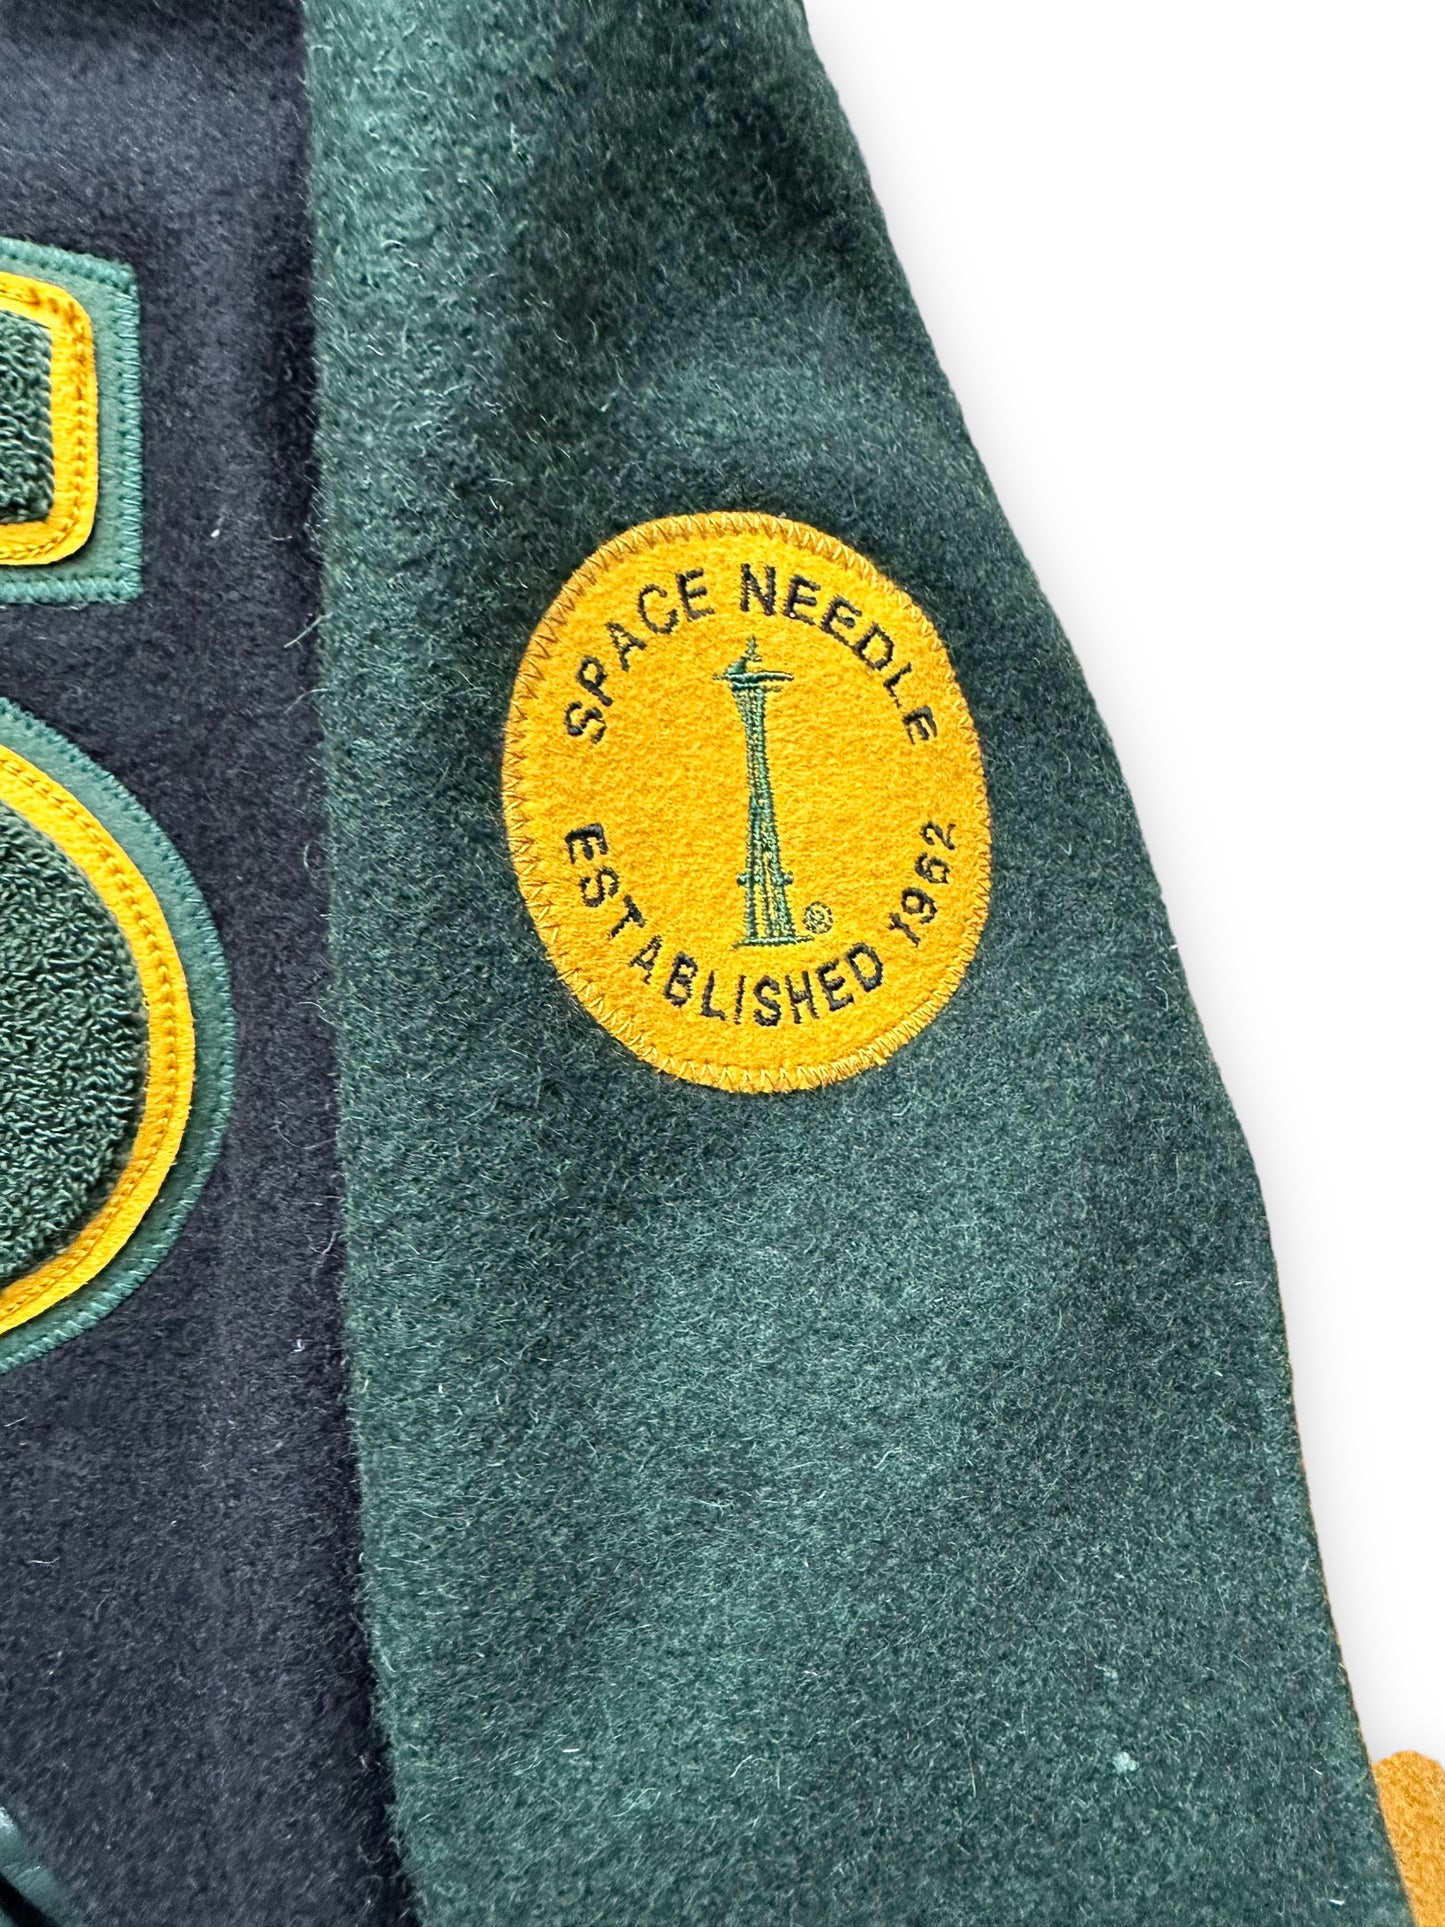 Space Needle Call Out on Sleeve of Seattle Supersonics Green Black and Yellow Prototype Jacket SZ L | Vintage Seattle Supersonics  | Seattle Vintage Basketball